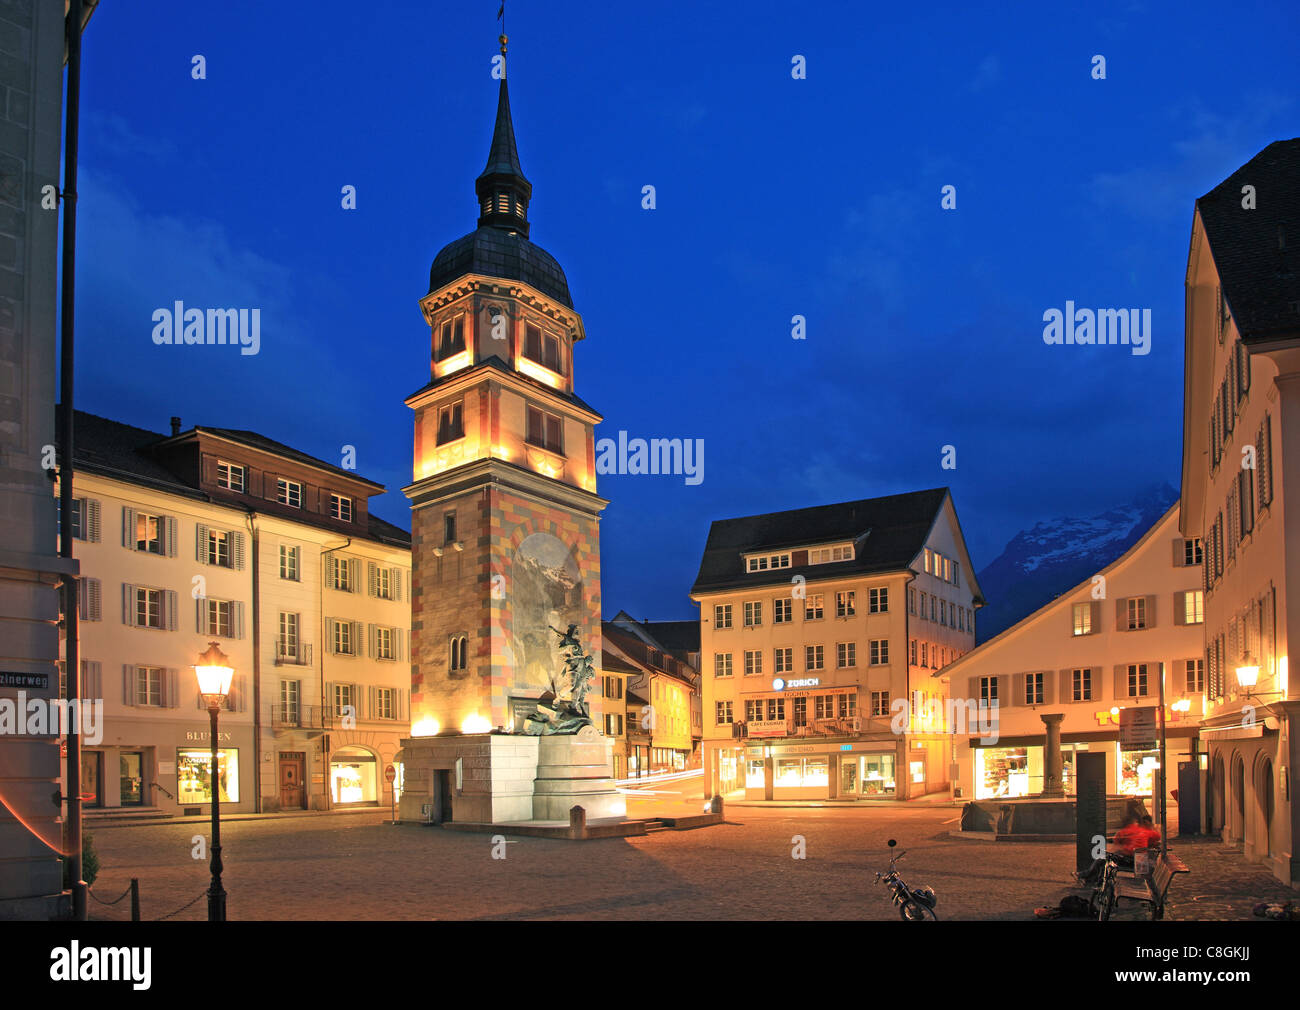 Altdorf Switzerland High Resolution Stock Photography and Images - Alamy